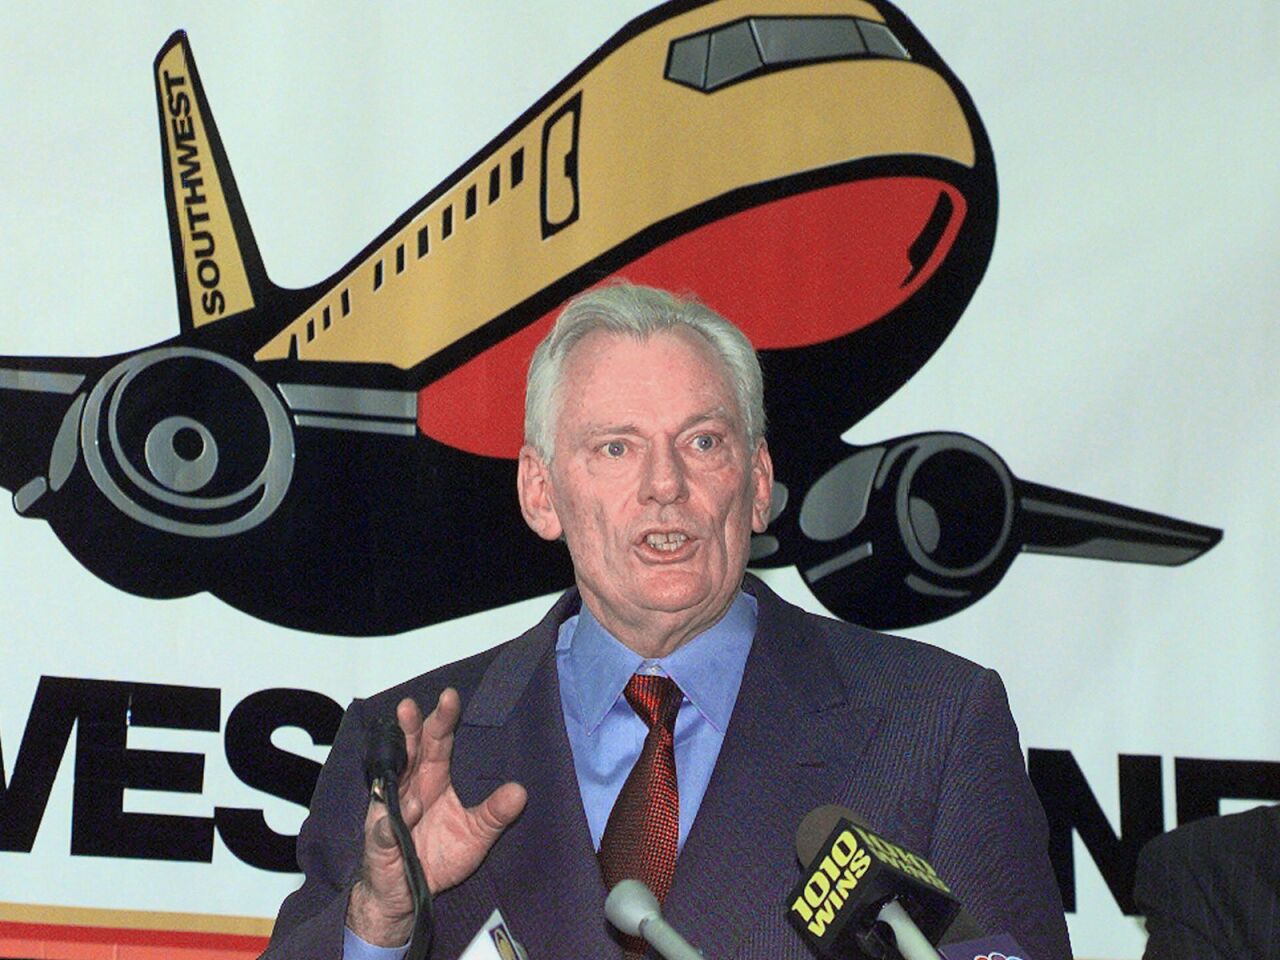 Herb Kelleher built Southwest Airlines into the biggest discount carrier and set the standard for budget air travel for more than three decades. He and co-founder Rollin King used a formula of short, no-frills trips that spawned dozens of imitators. He was 87.